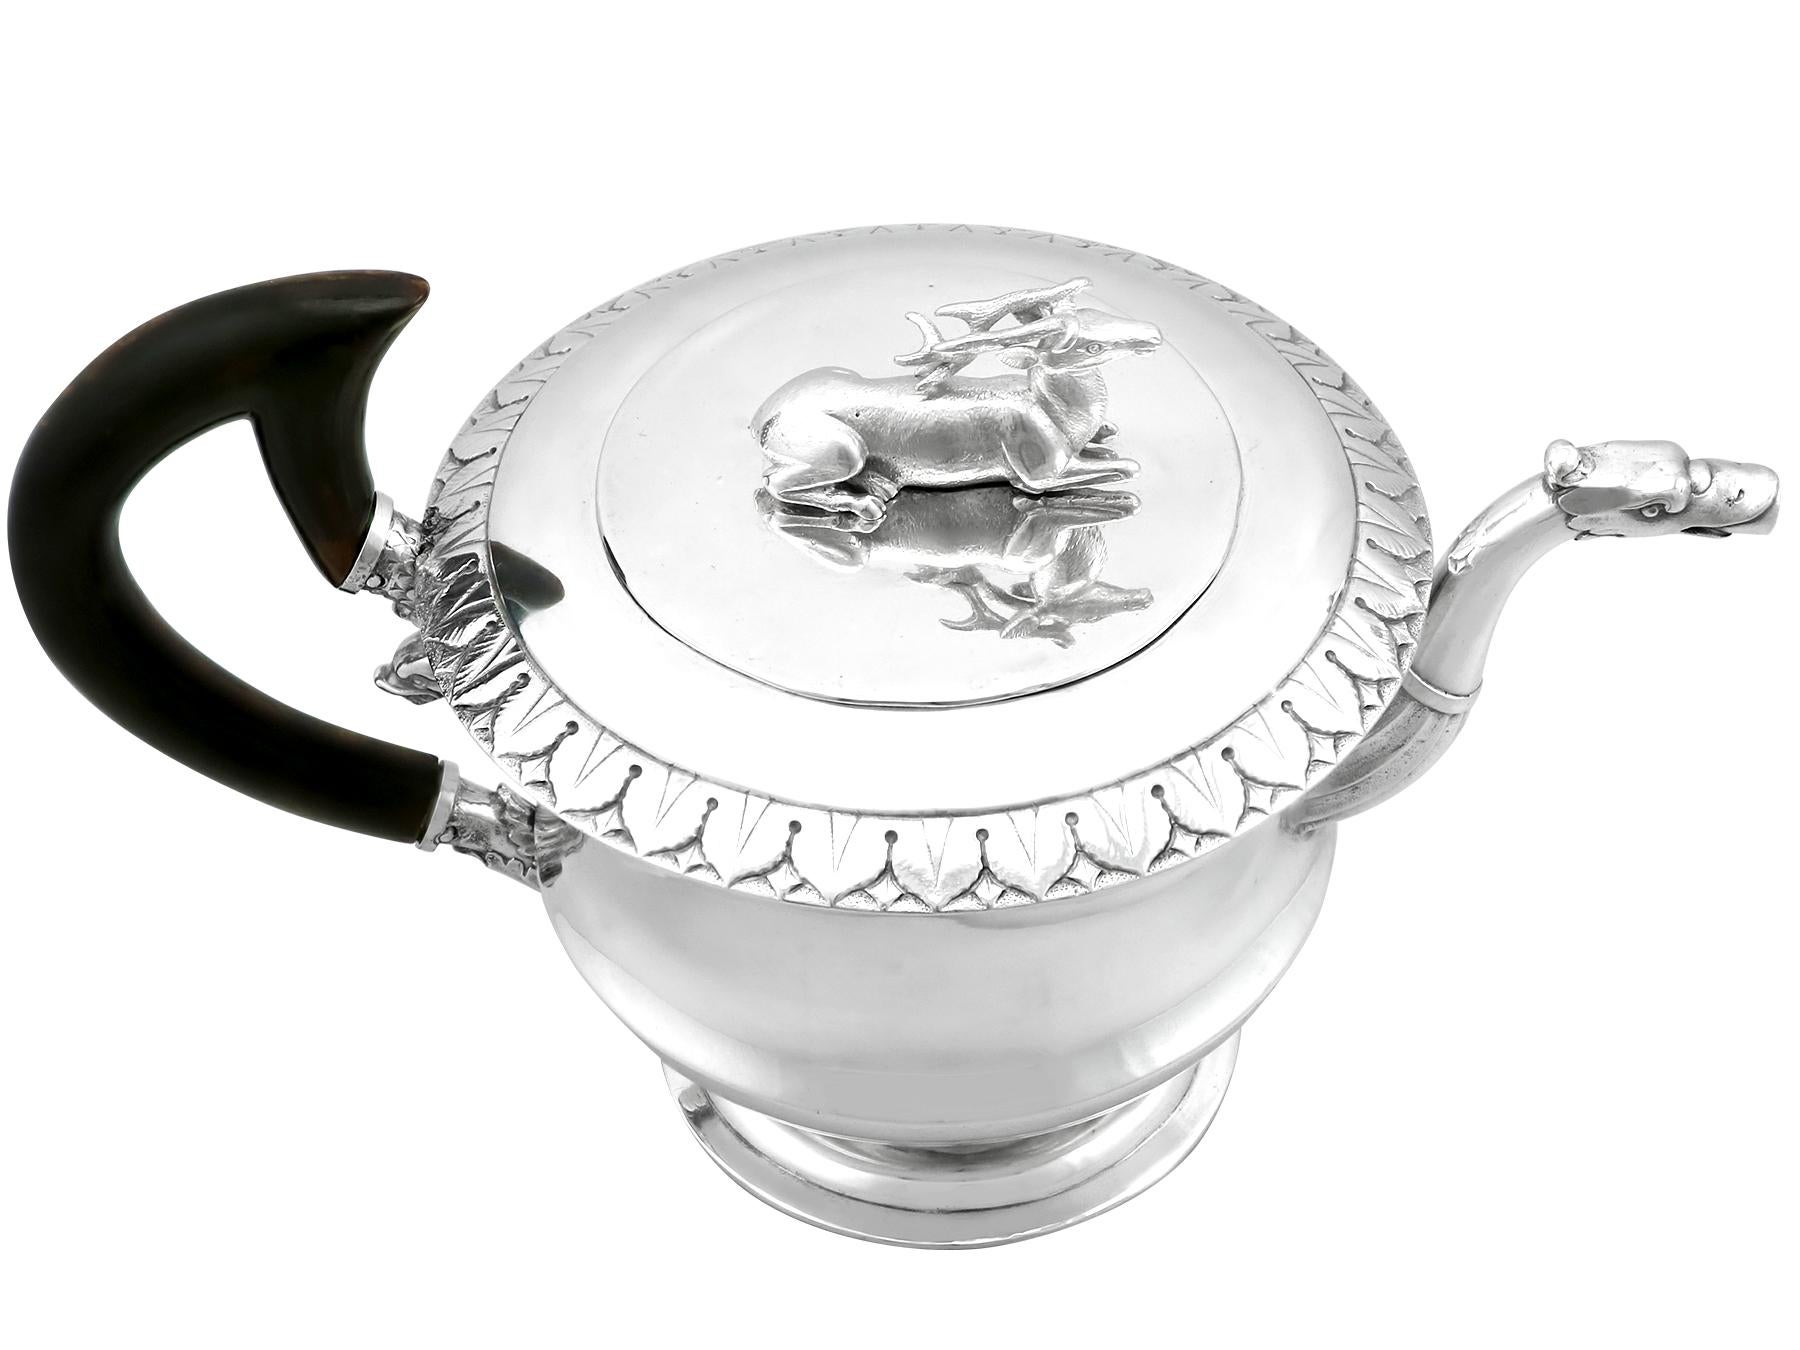 An exceptional, fine and impressive antique German silver teapot; an addition to our silver teaware collection

This exceptional antique German silver teapot has a circular incurved baluster form.

The surface of this antique 19th century teapot is